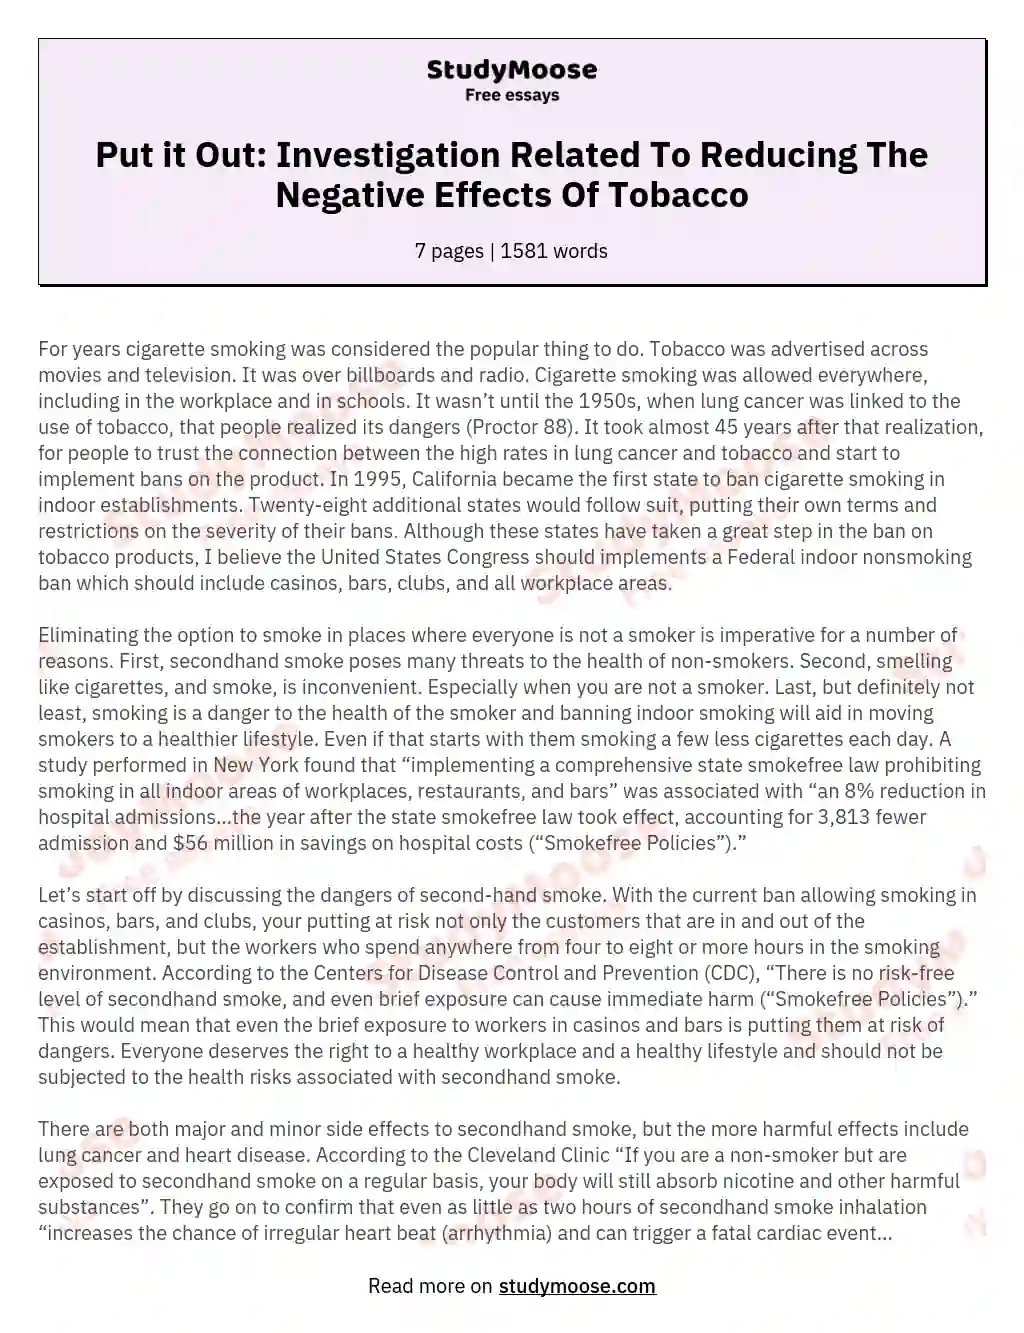 Put it Out: Investigation Related To Reducing The Negative Effects Of Tobacco essay